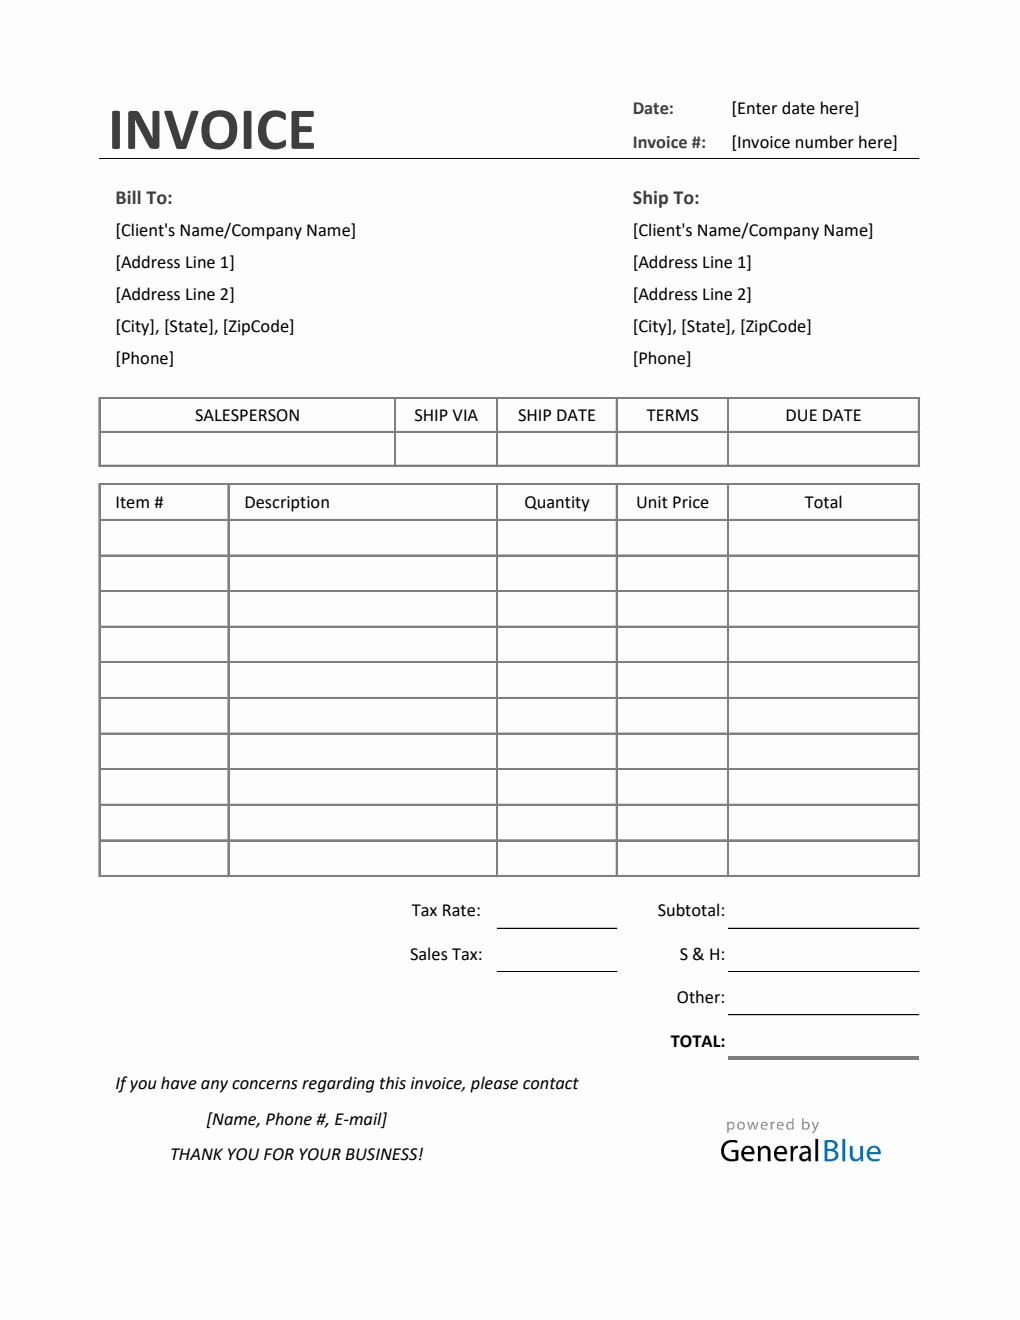 Sales Invoice with Tax in Excel (Simple)